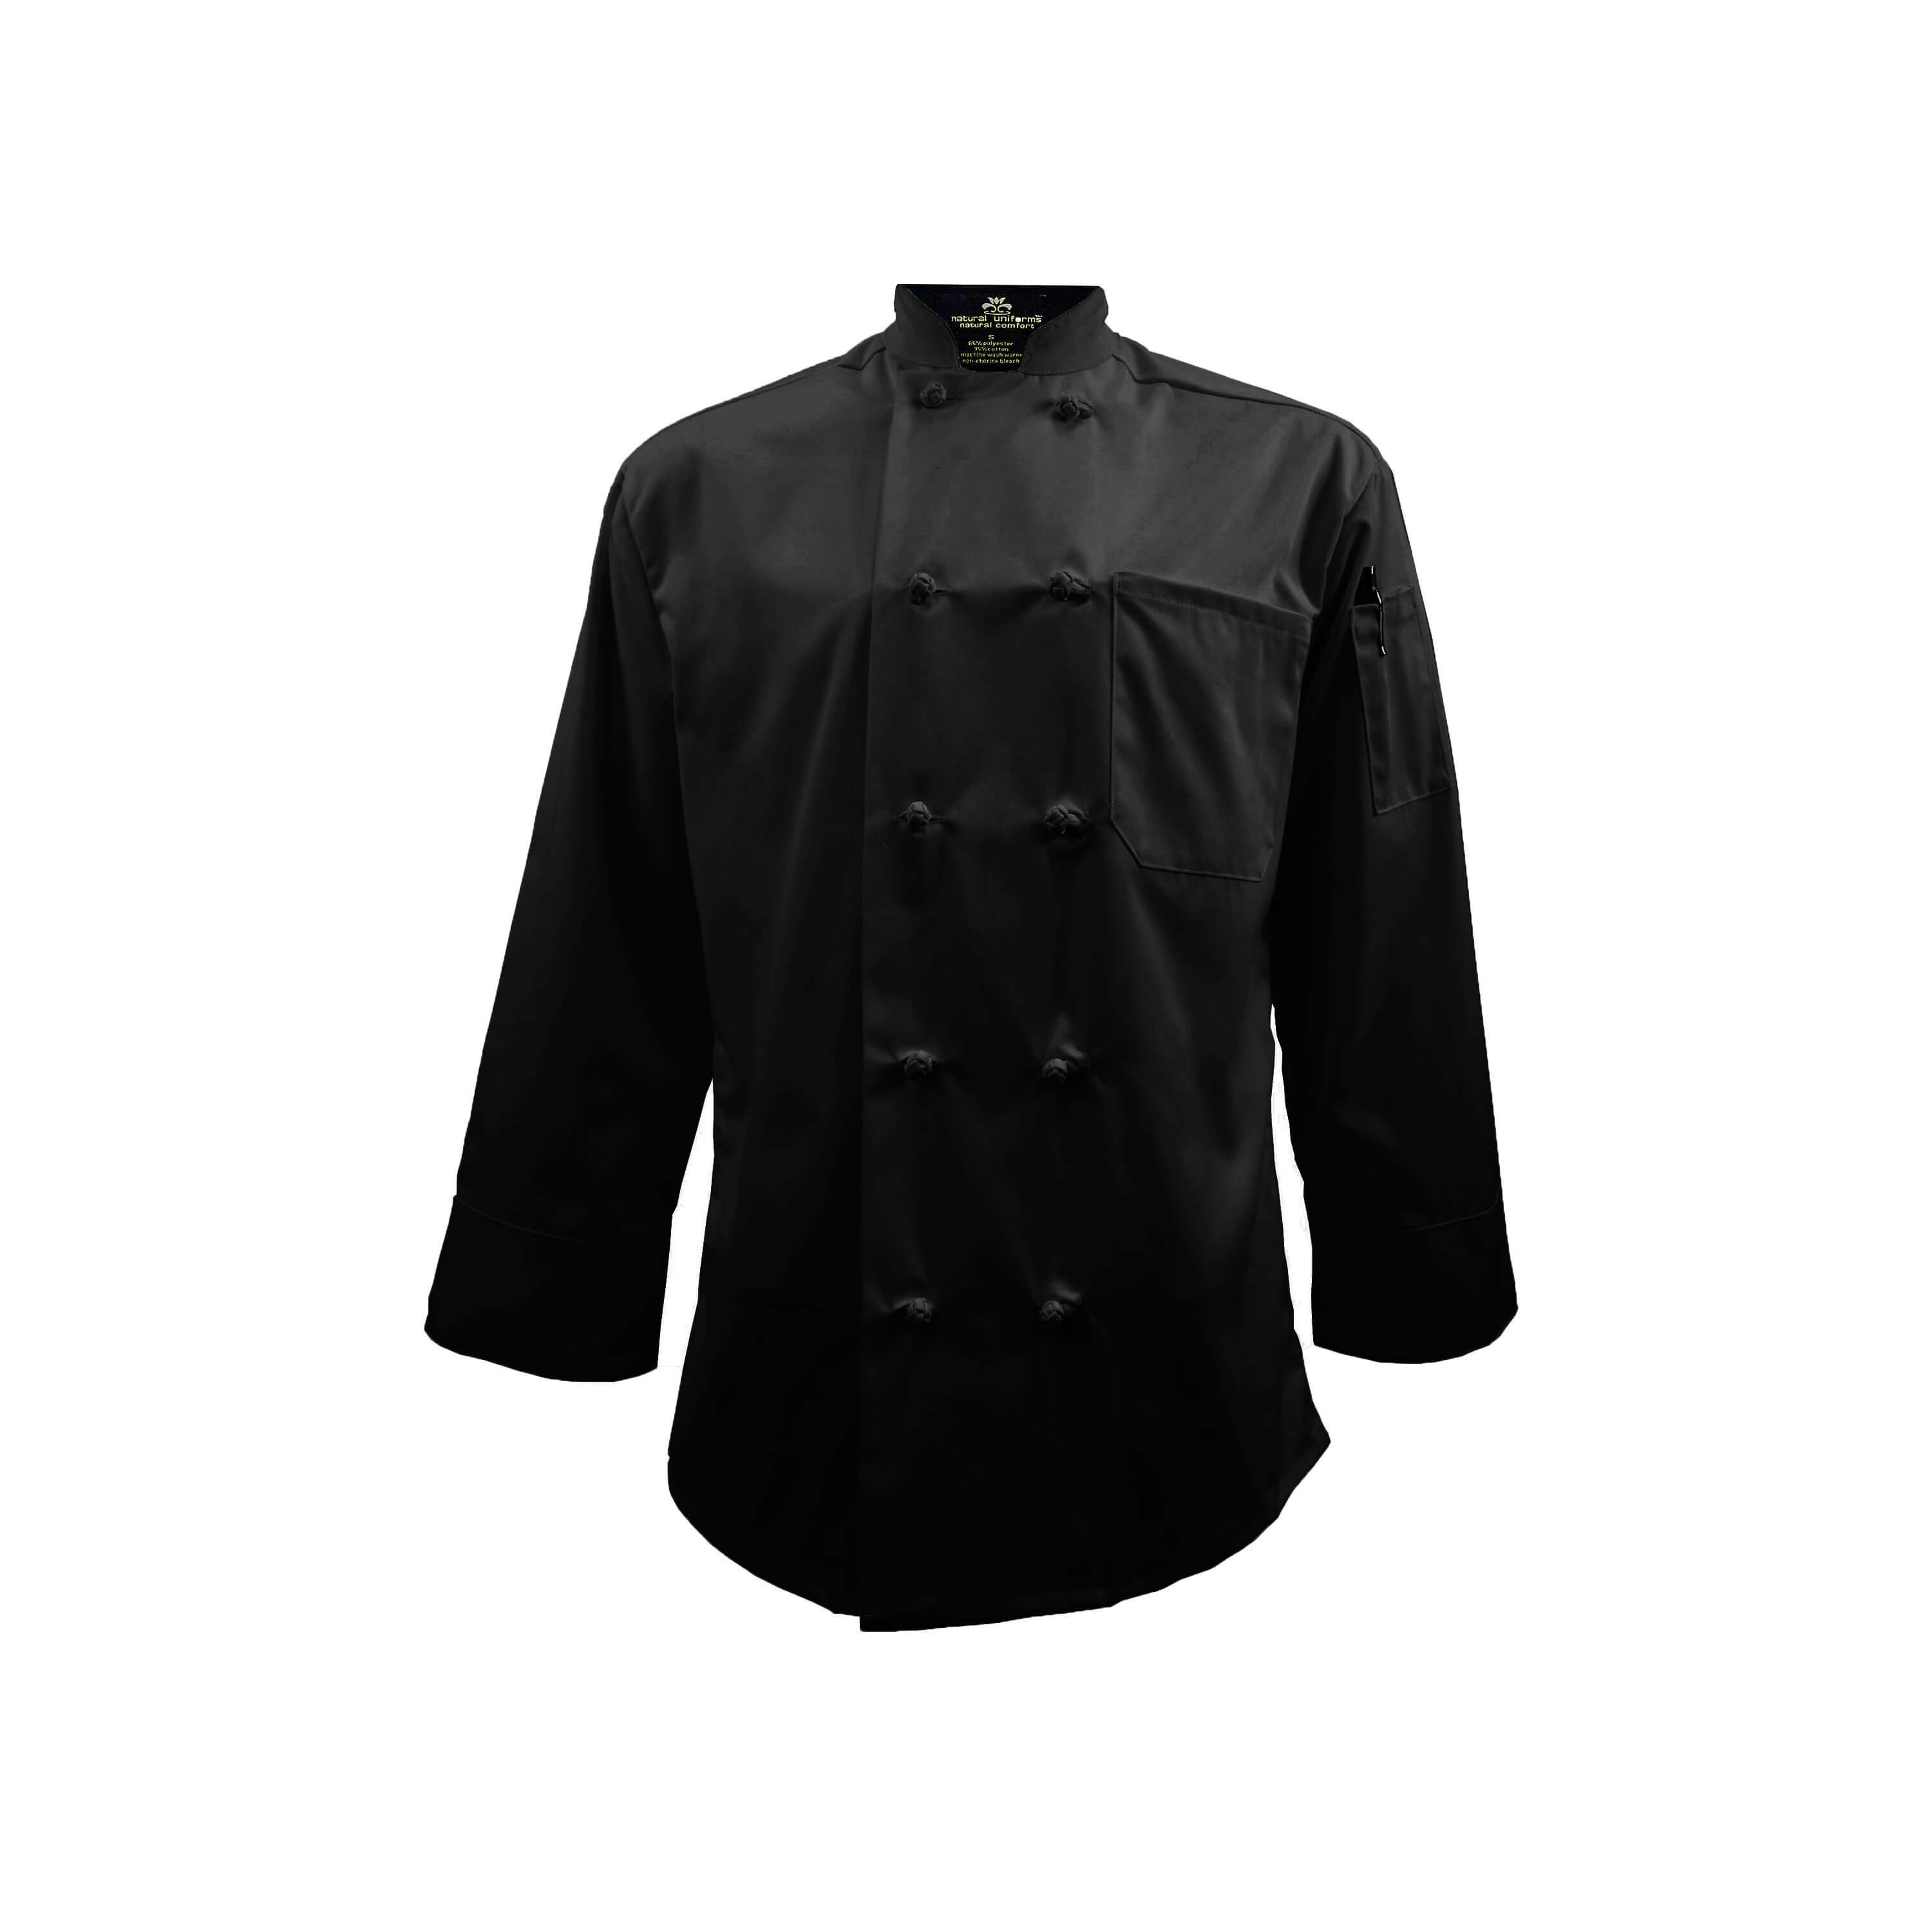 Leiber Chef Jacket 12/8790 Black Chef Uniform with buttons in desired colour 